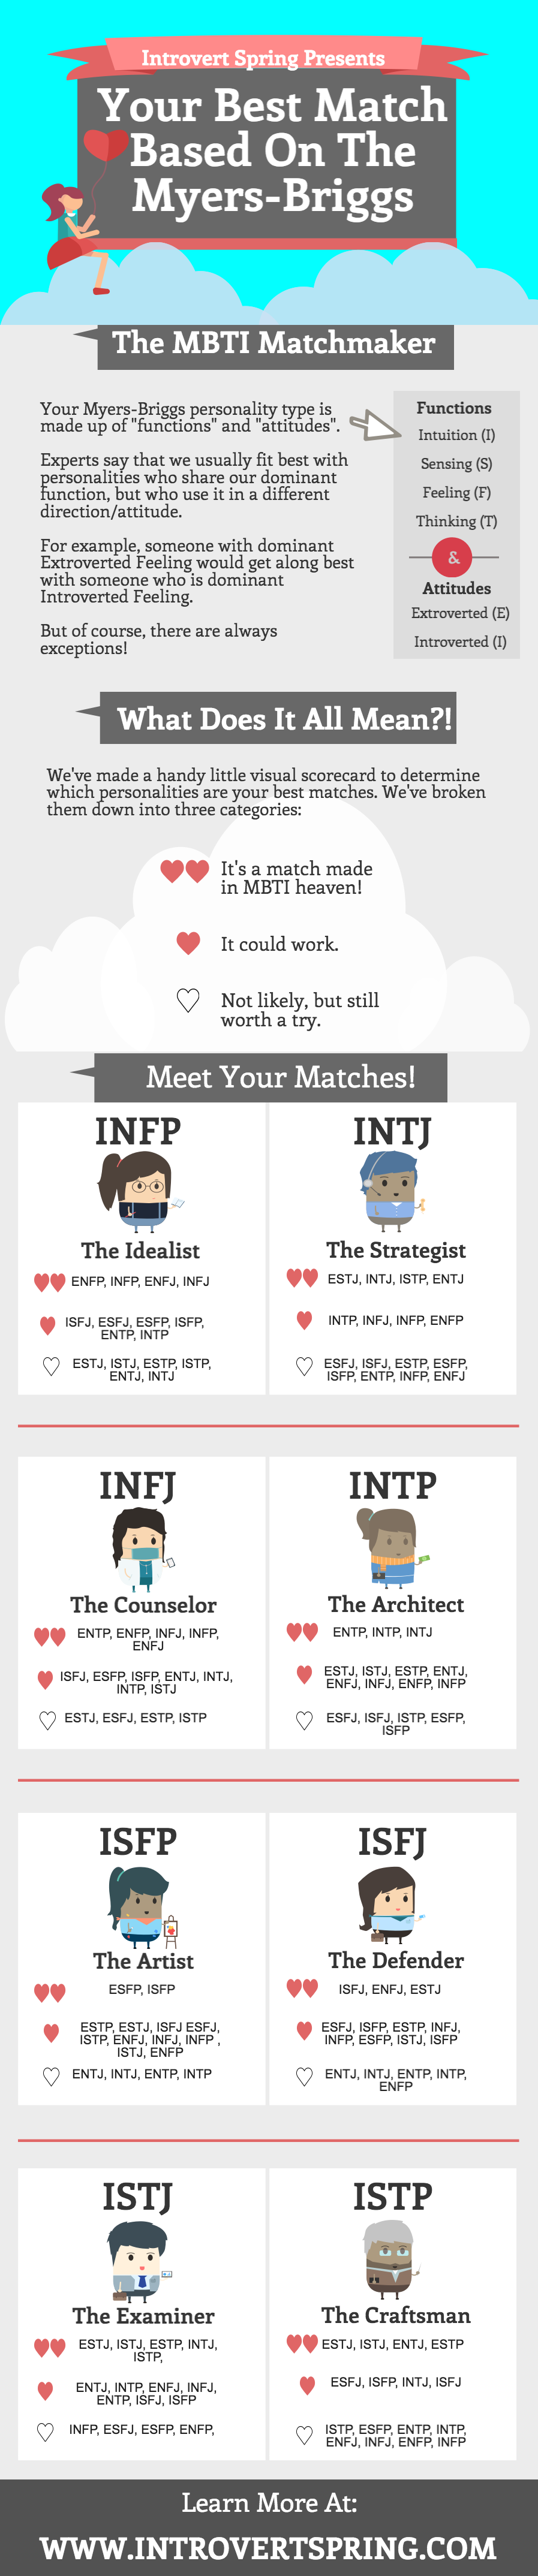 enfp dating isfp)